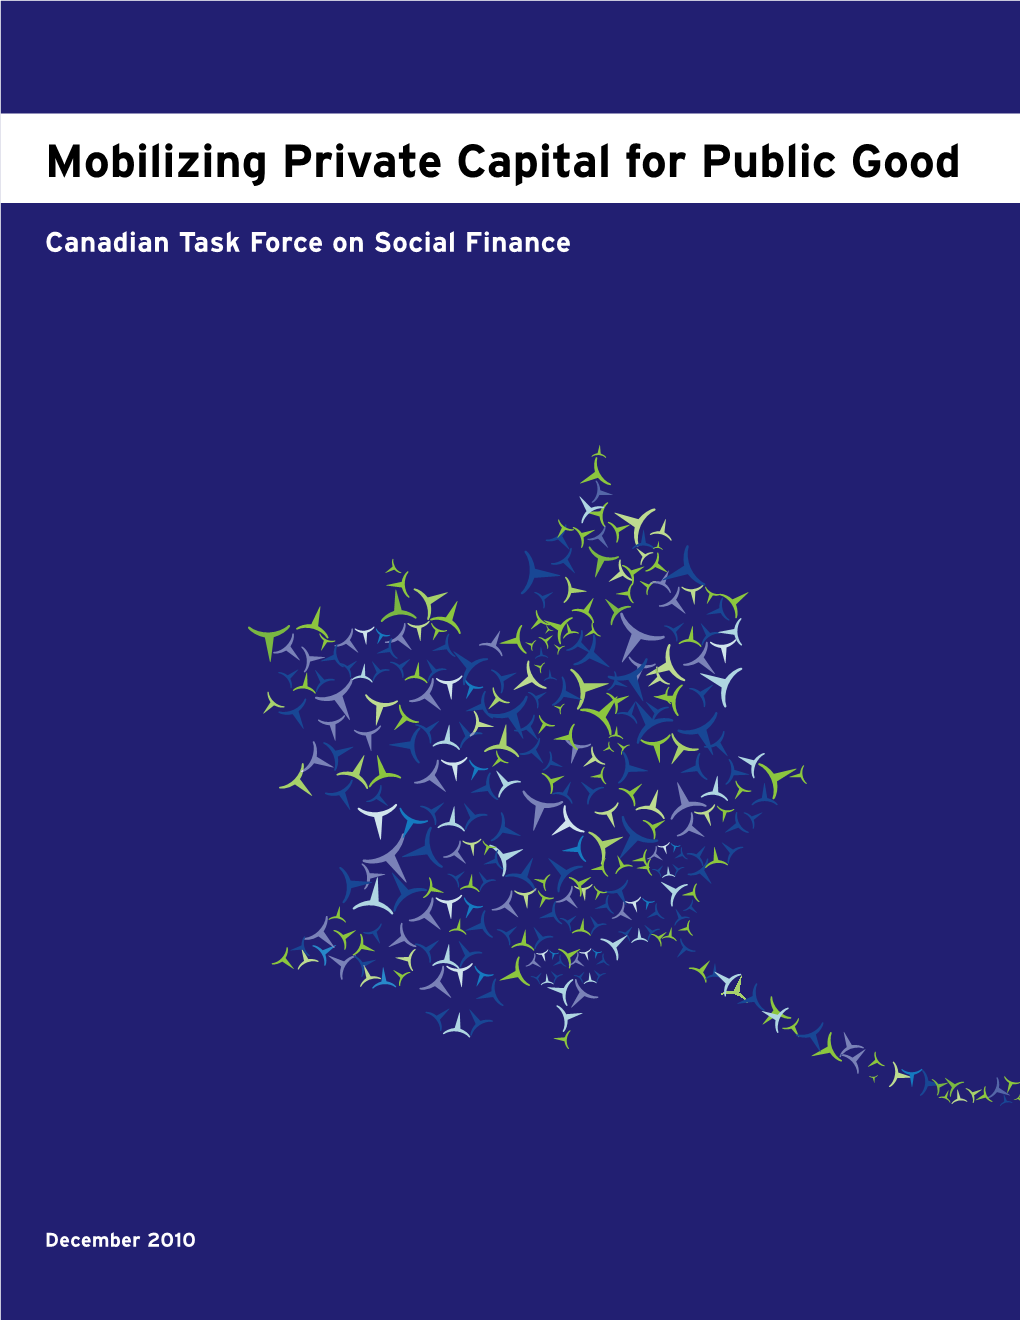 Mobilizing Private Capital for Public Good